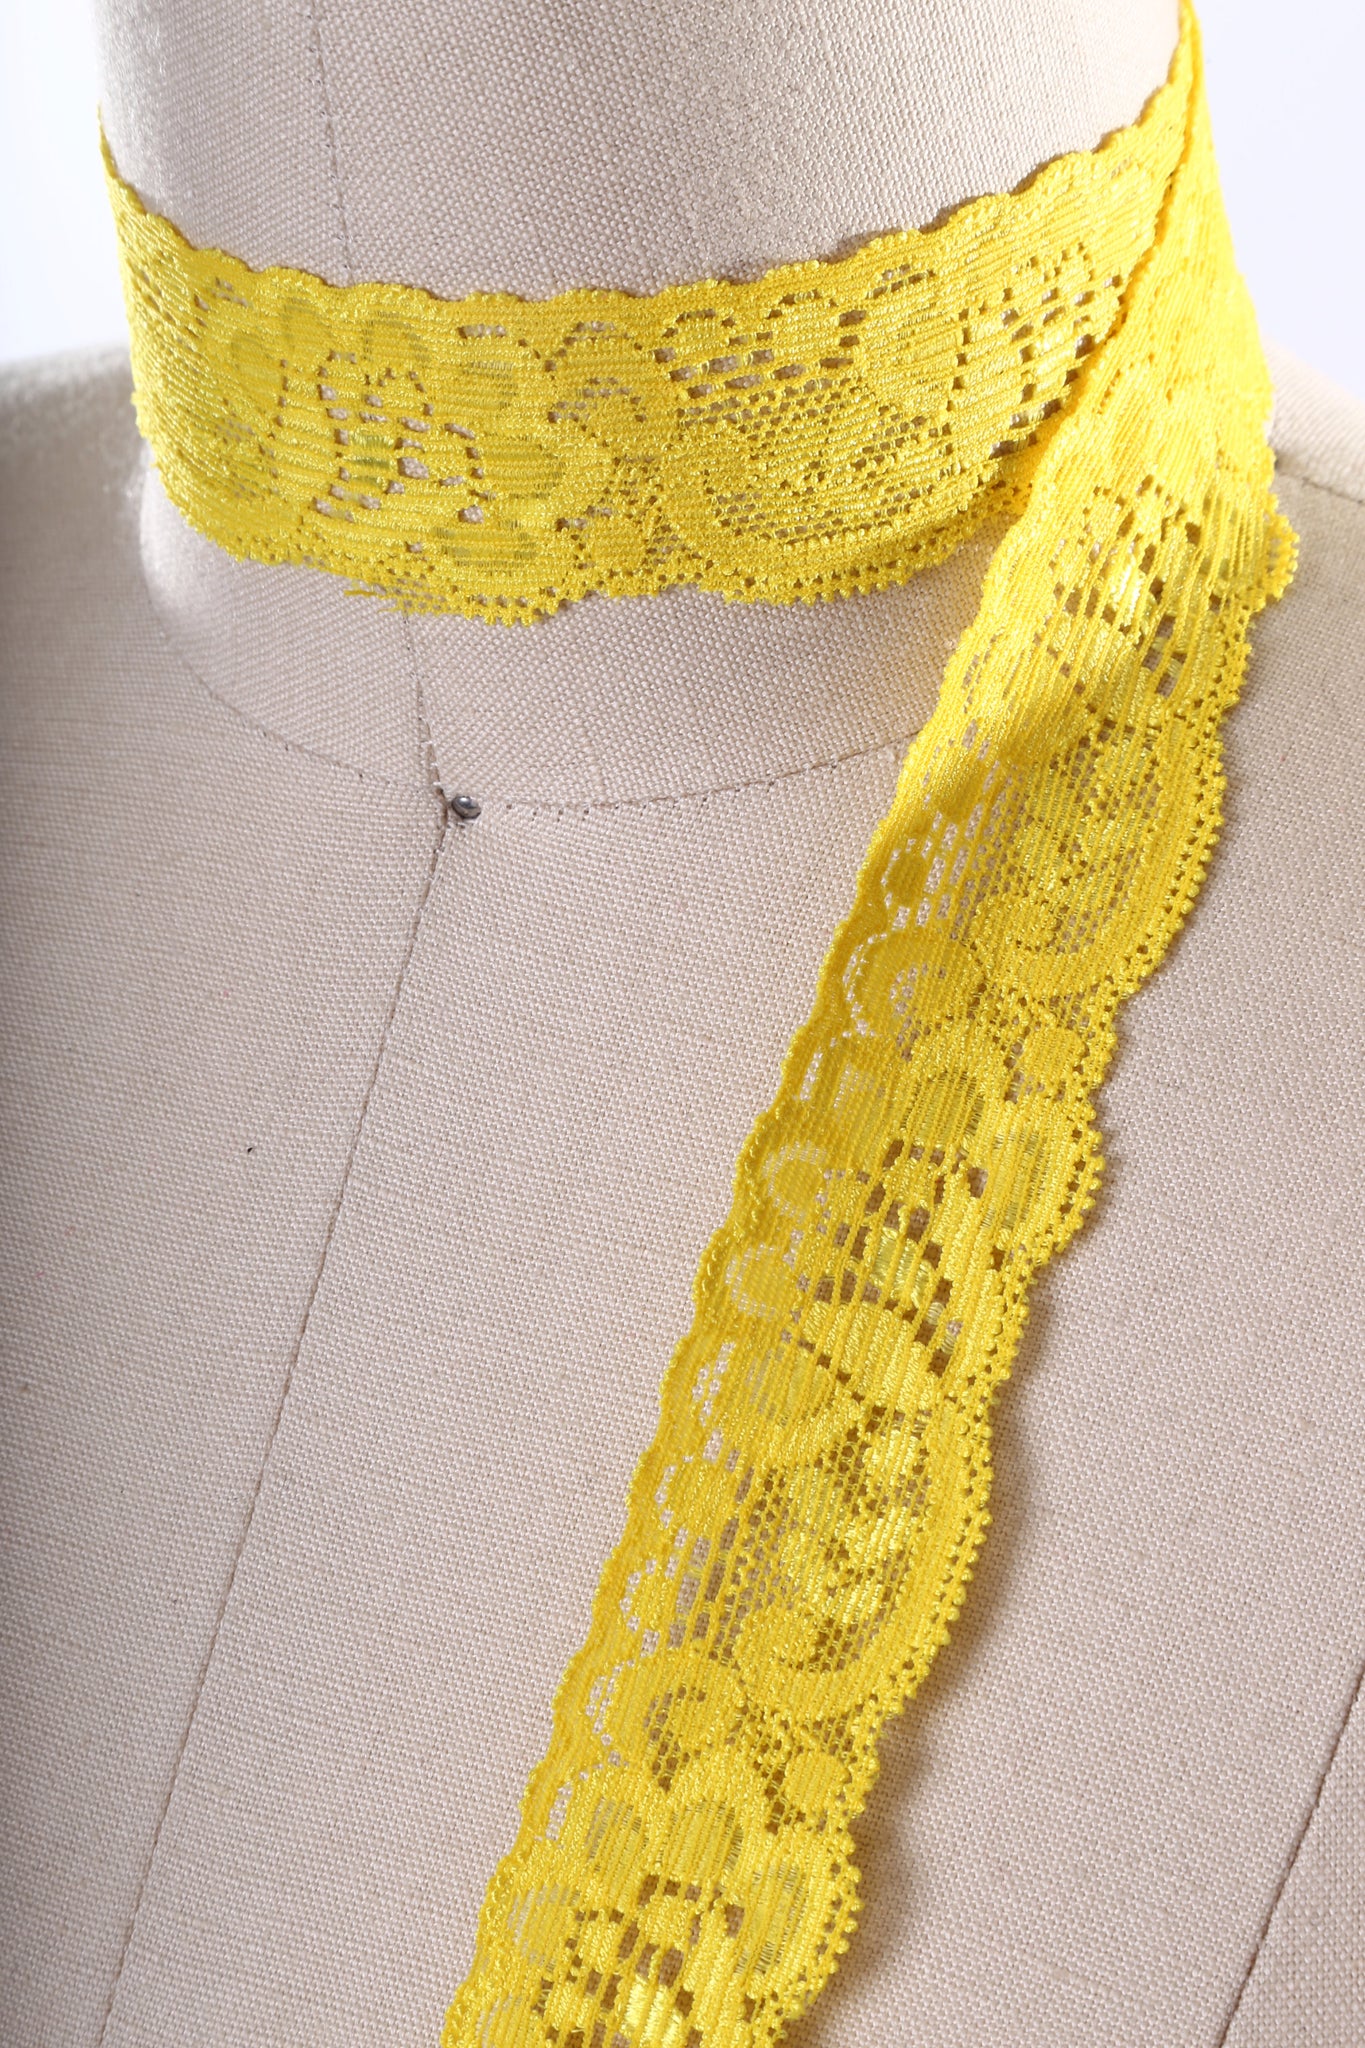 1" Bright Yellow Stretch Floral Elastic Lace Trim